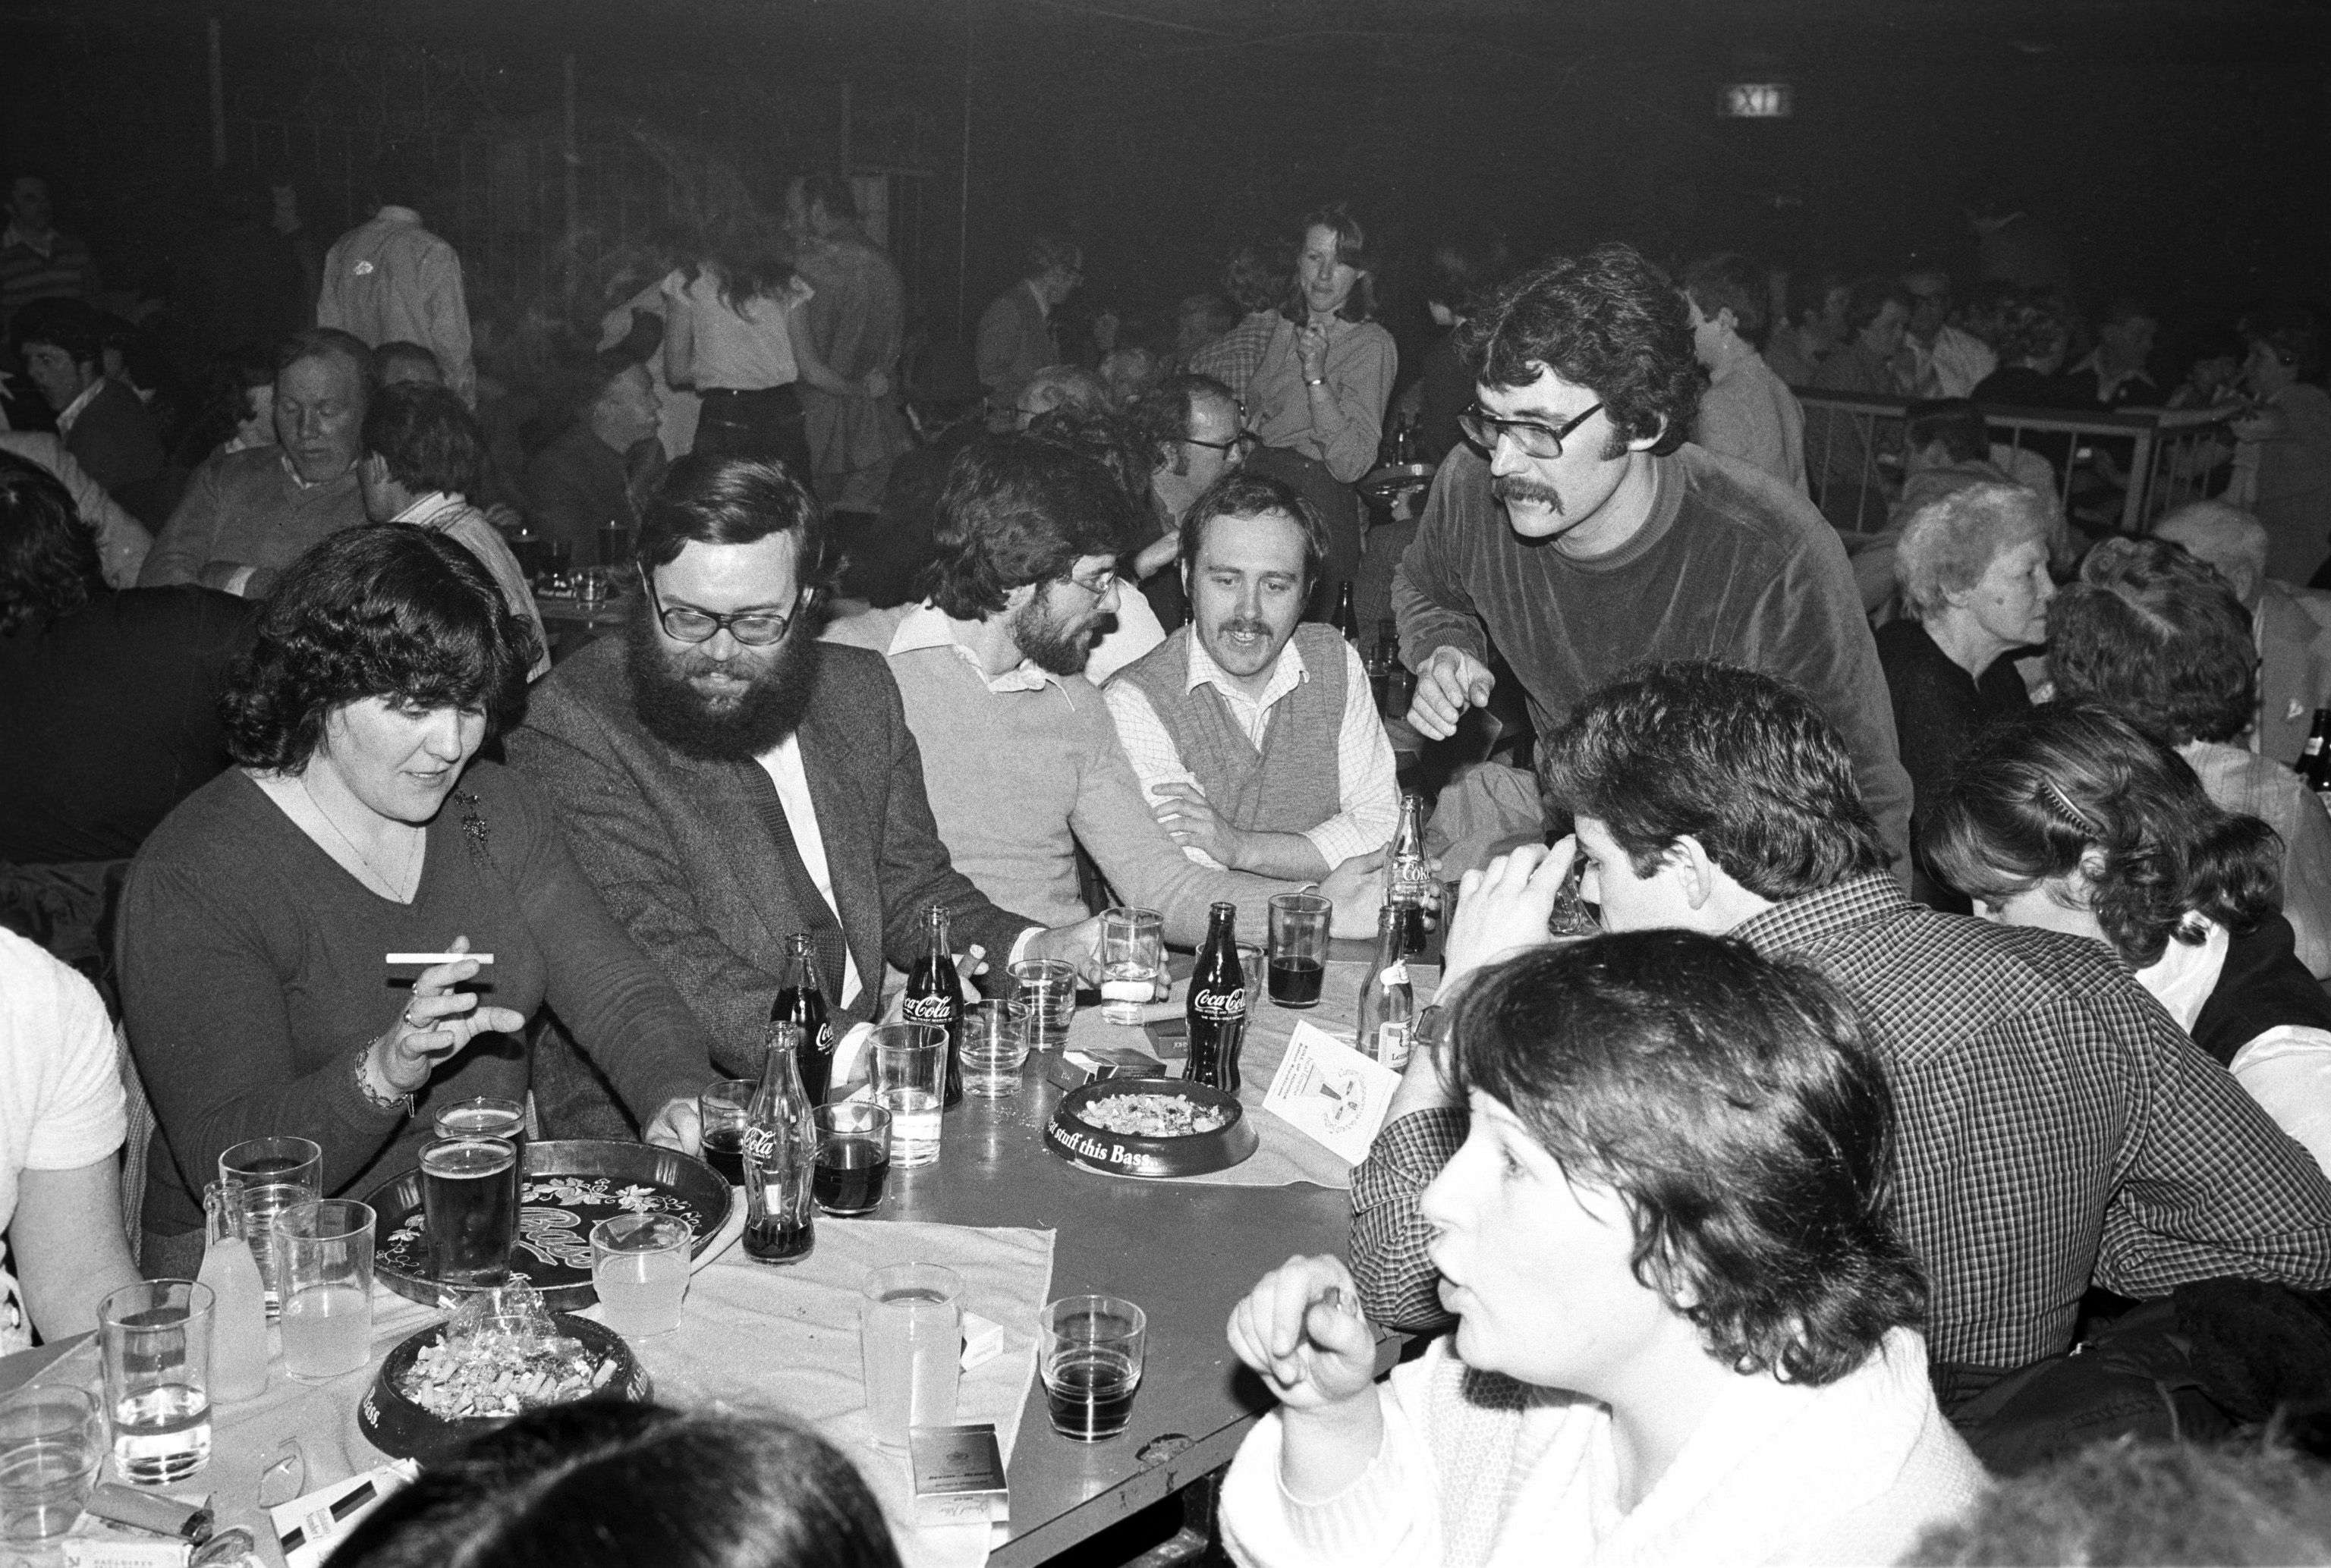 Collette Adams, Tom Hartley, Gerry Adams, Danny Morrison and Peter Hartley at Ceilí na Casca, Easter Sunday 1980